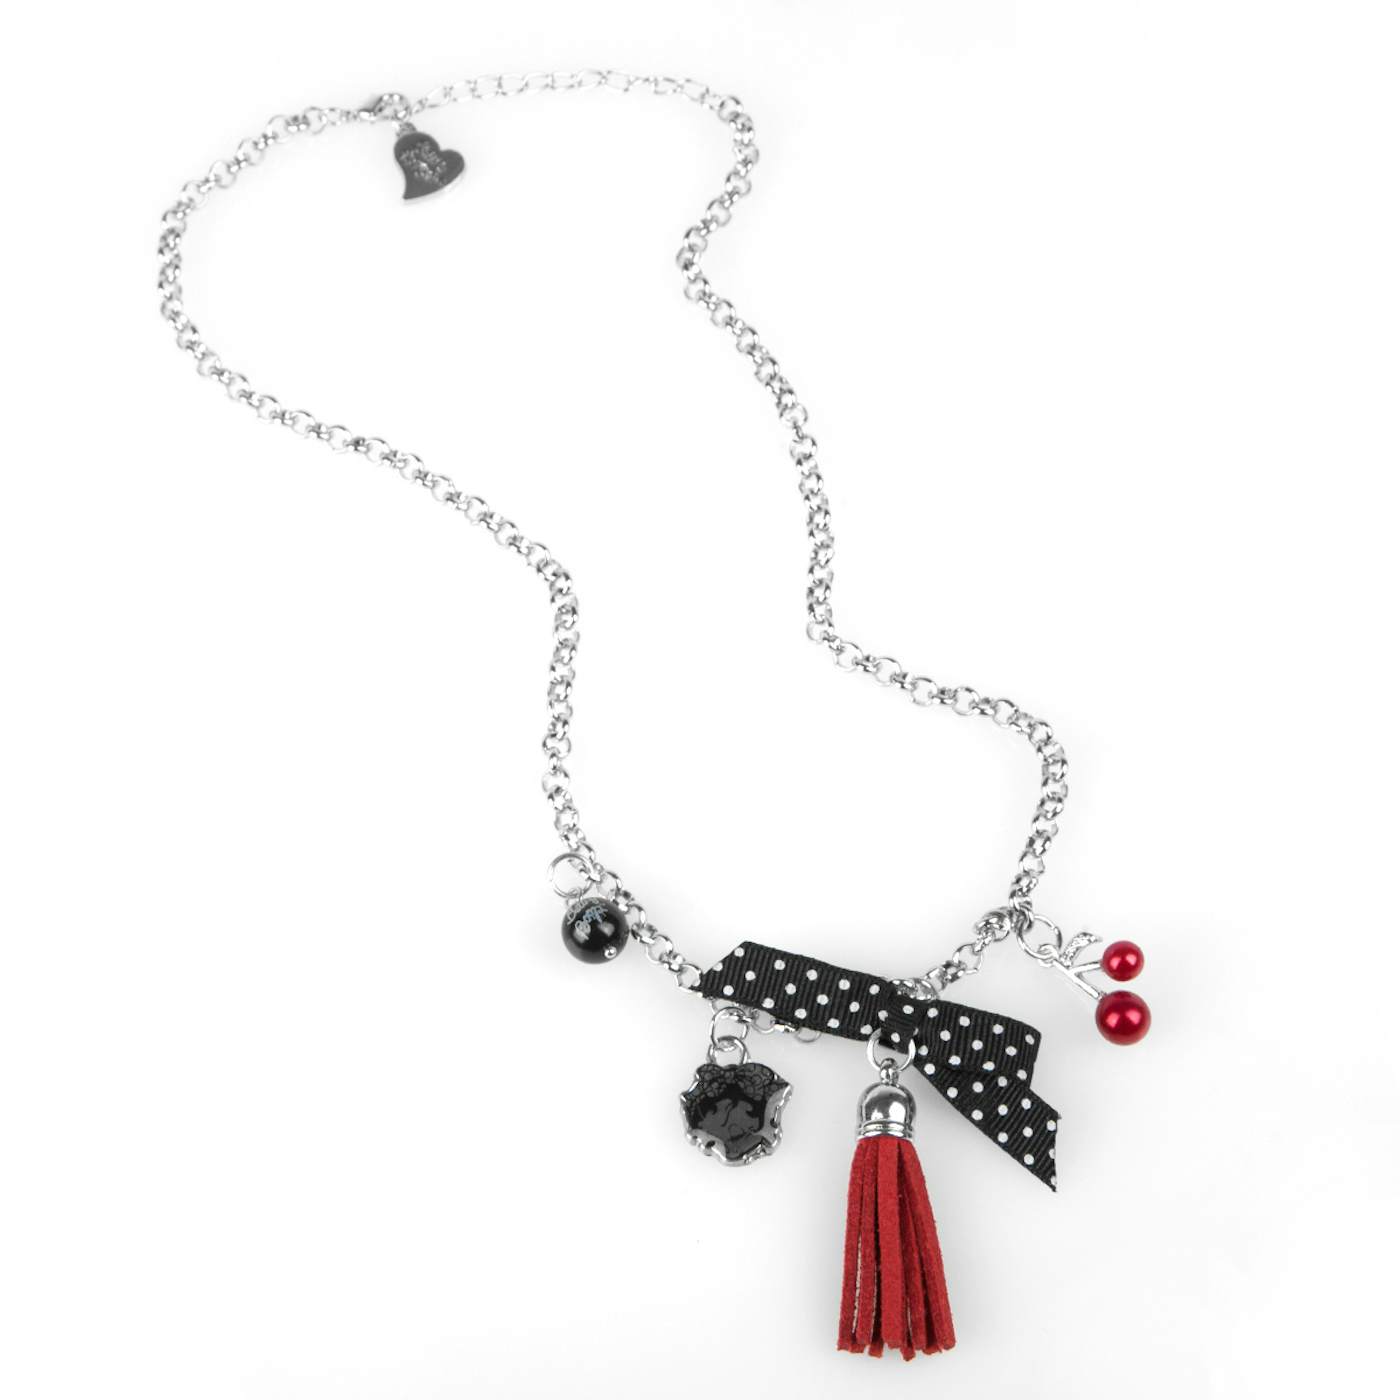 Betty Boop Charm Necklace with Bangles and Ribbons